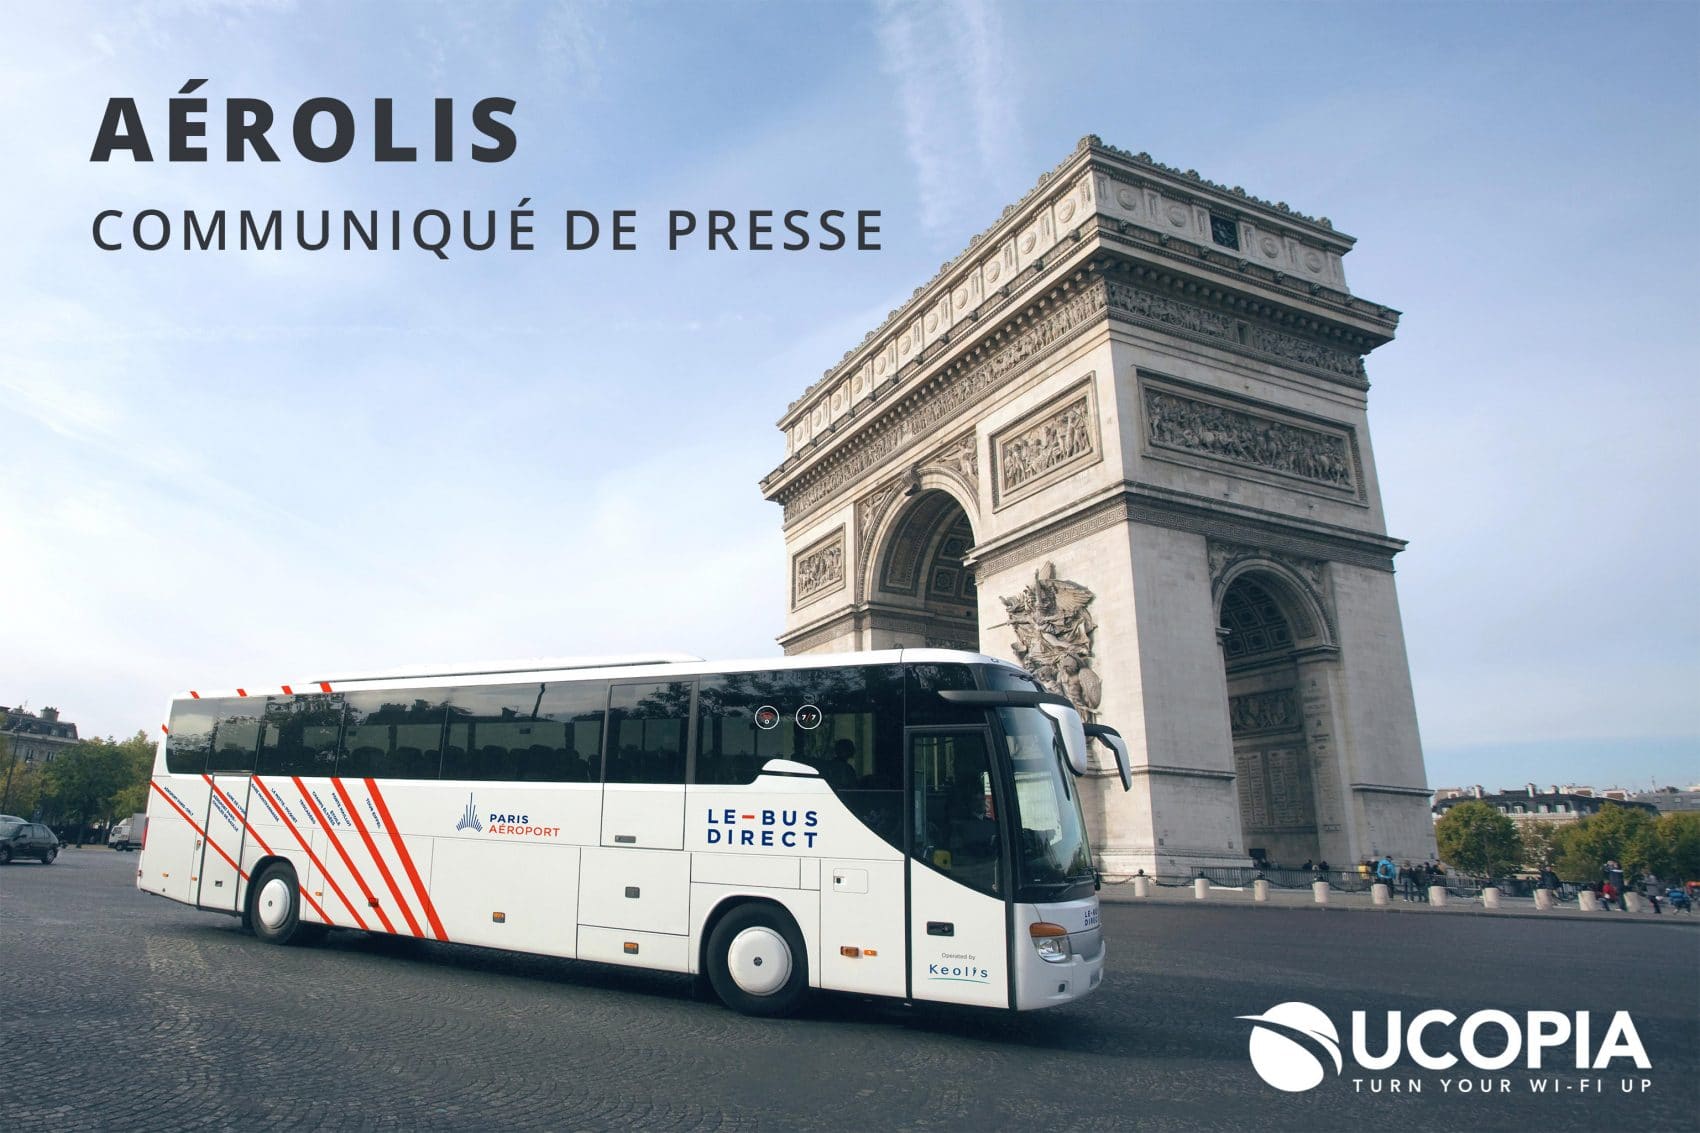 Aérolis chooses UCOPIA for its free WiFi on buses